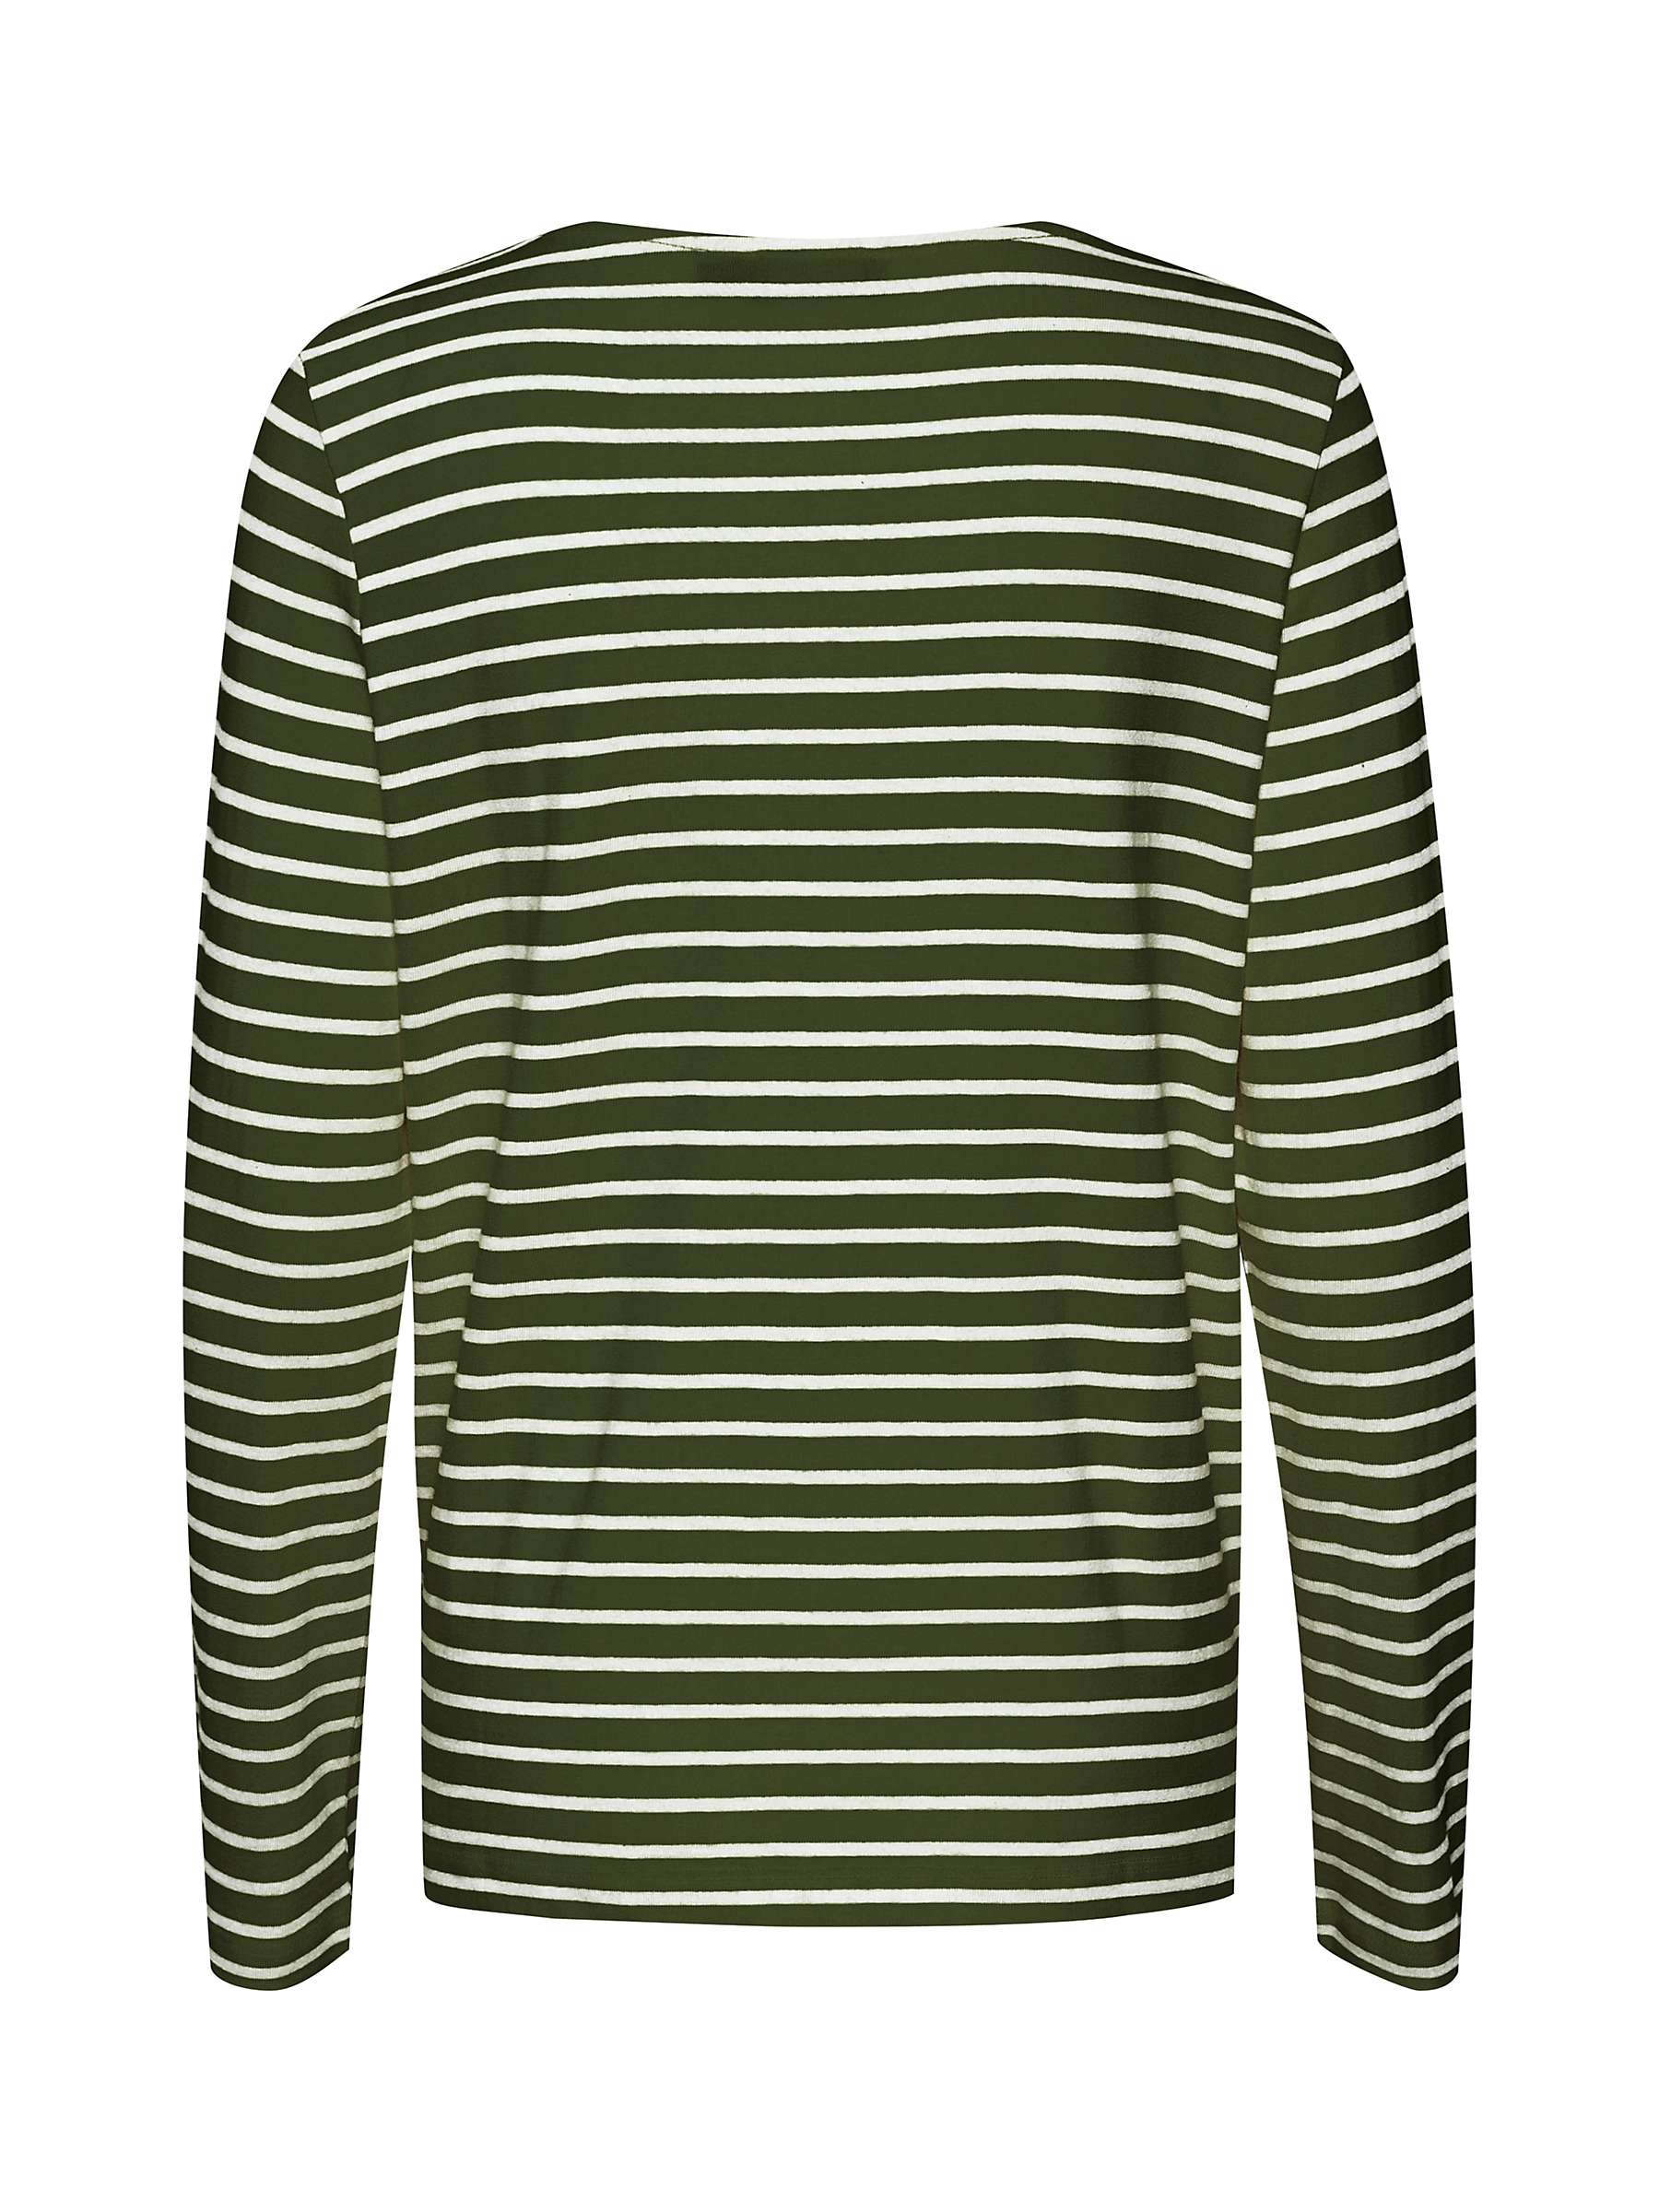 Buy Soaked In Luxury Neo Striped Long Sleeve T-Shirt Online at johnlewis.com